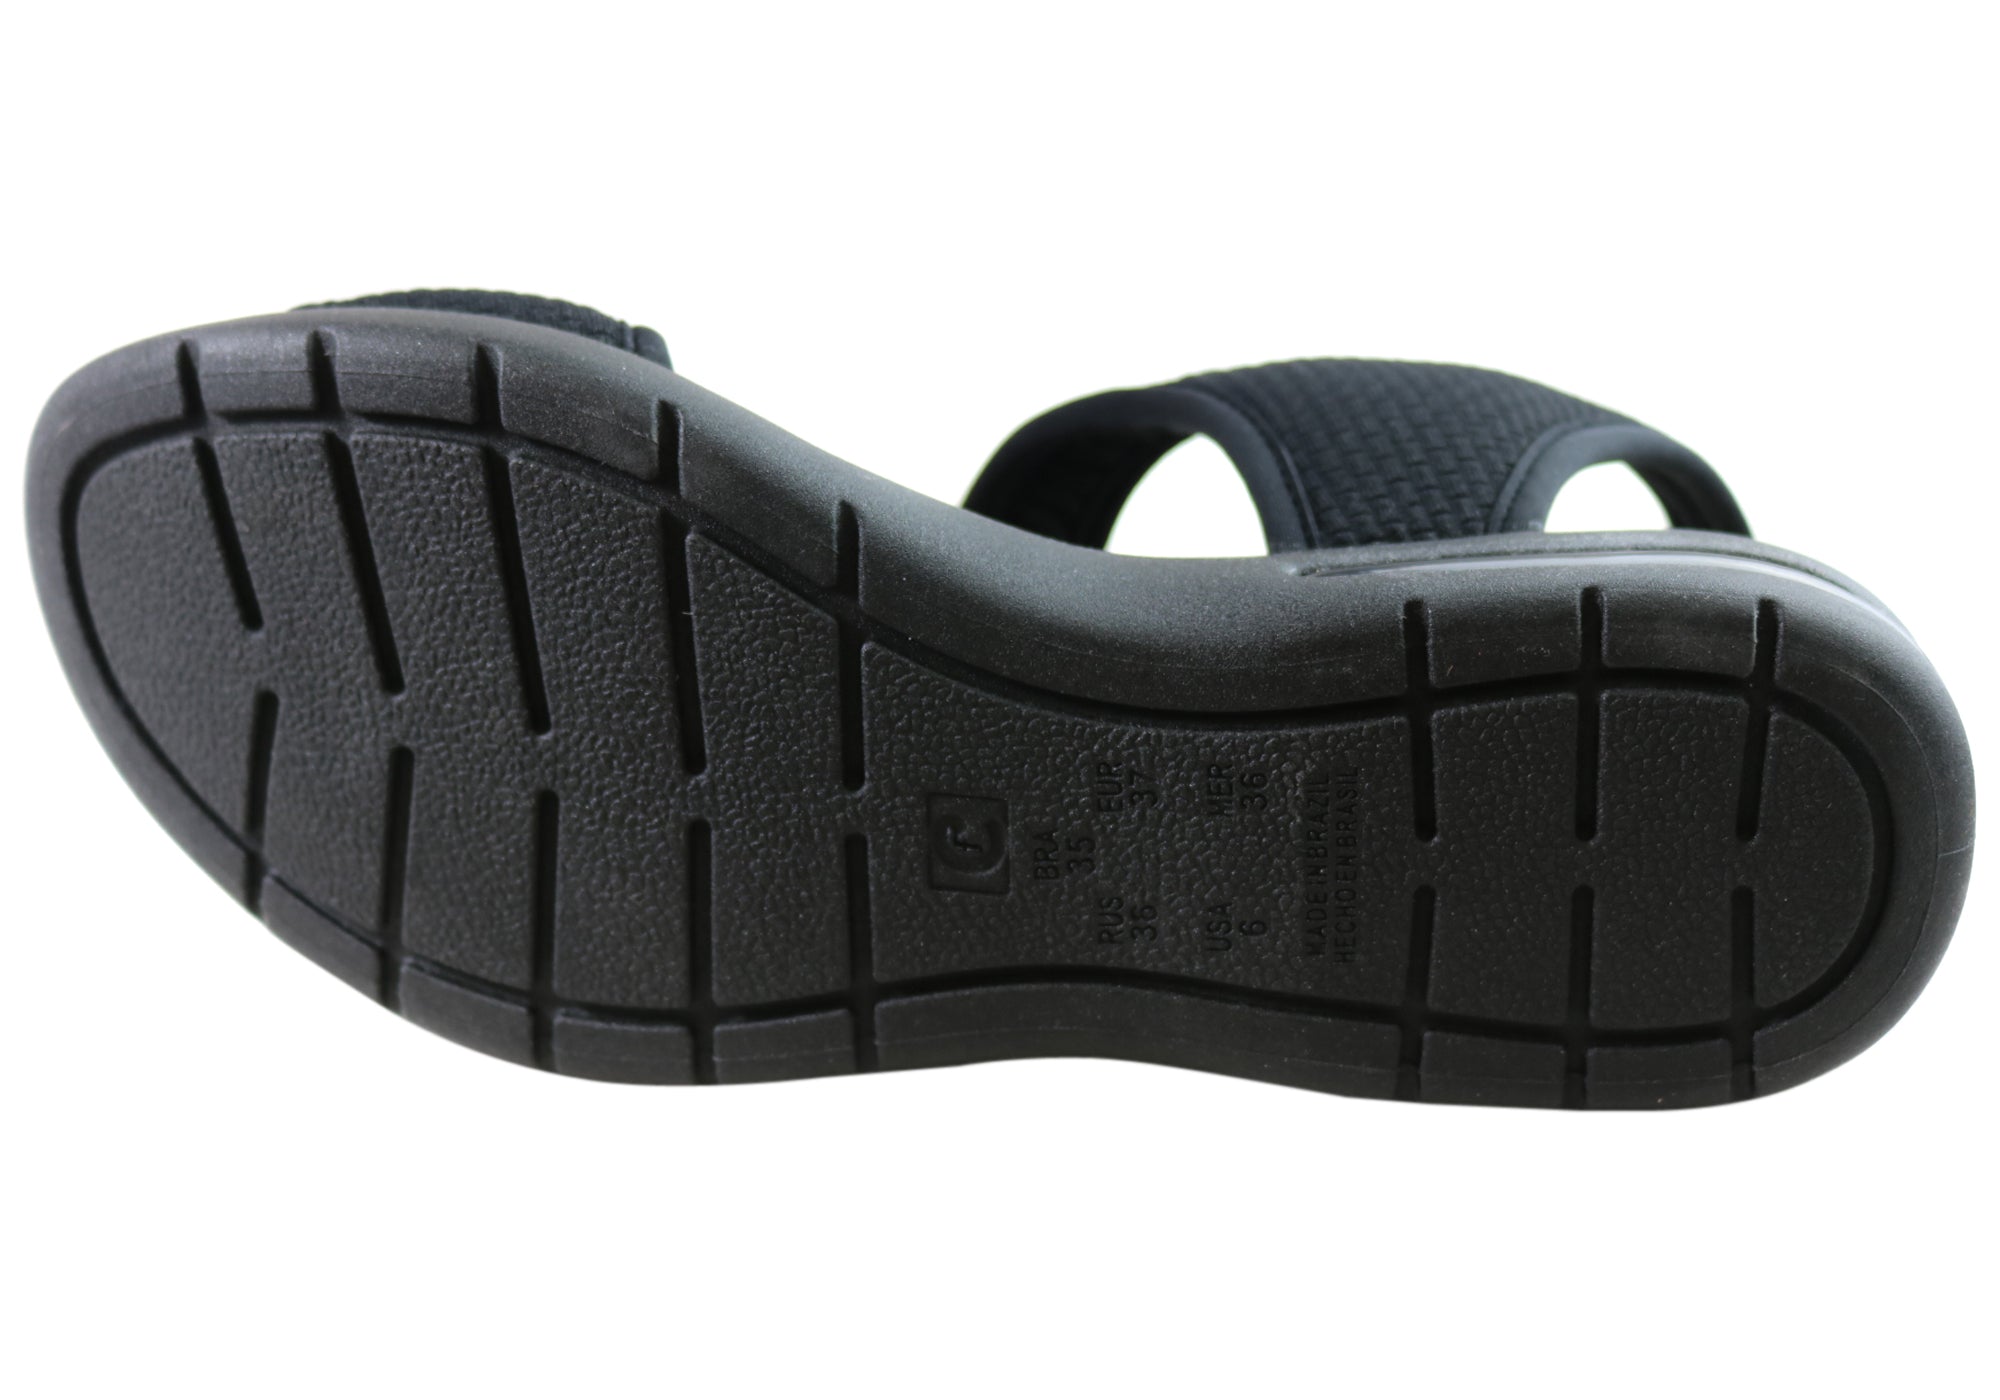 Comfortflex Relax Womens Comfortable Sandals Made In Brazil